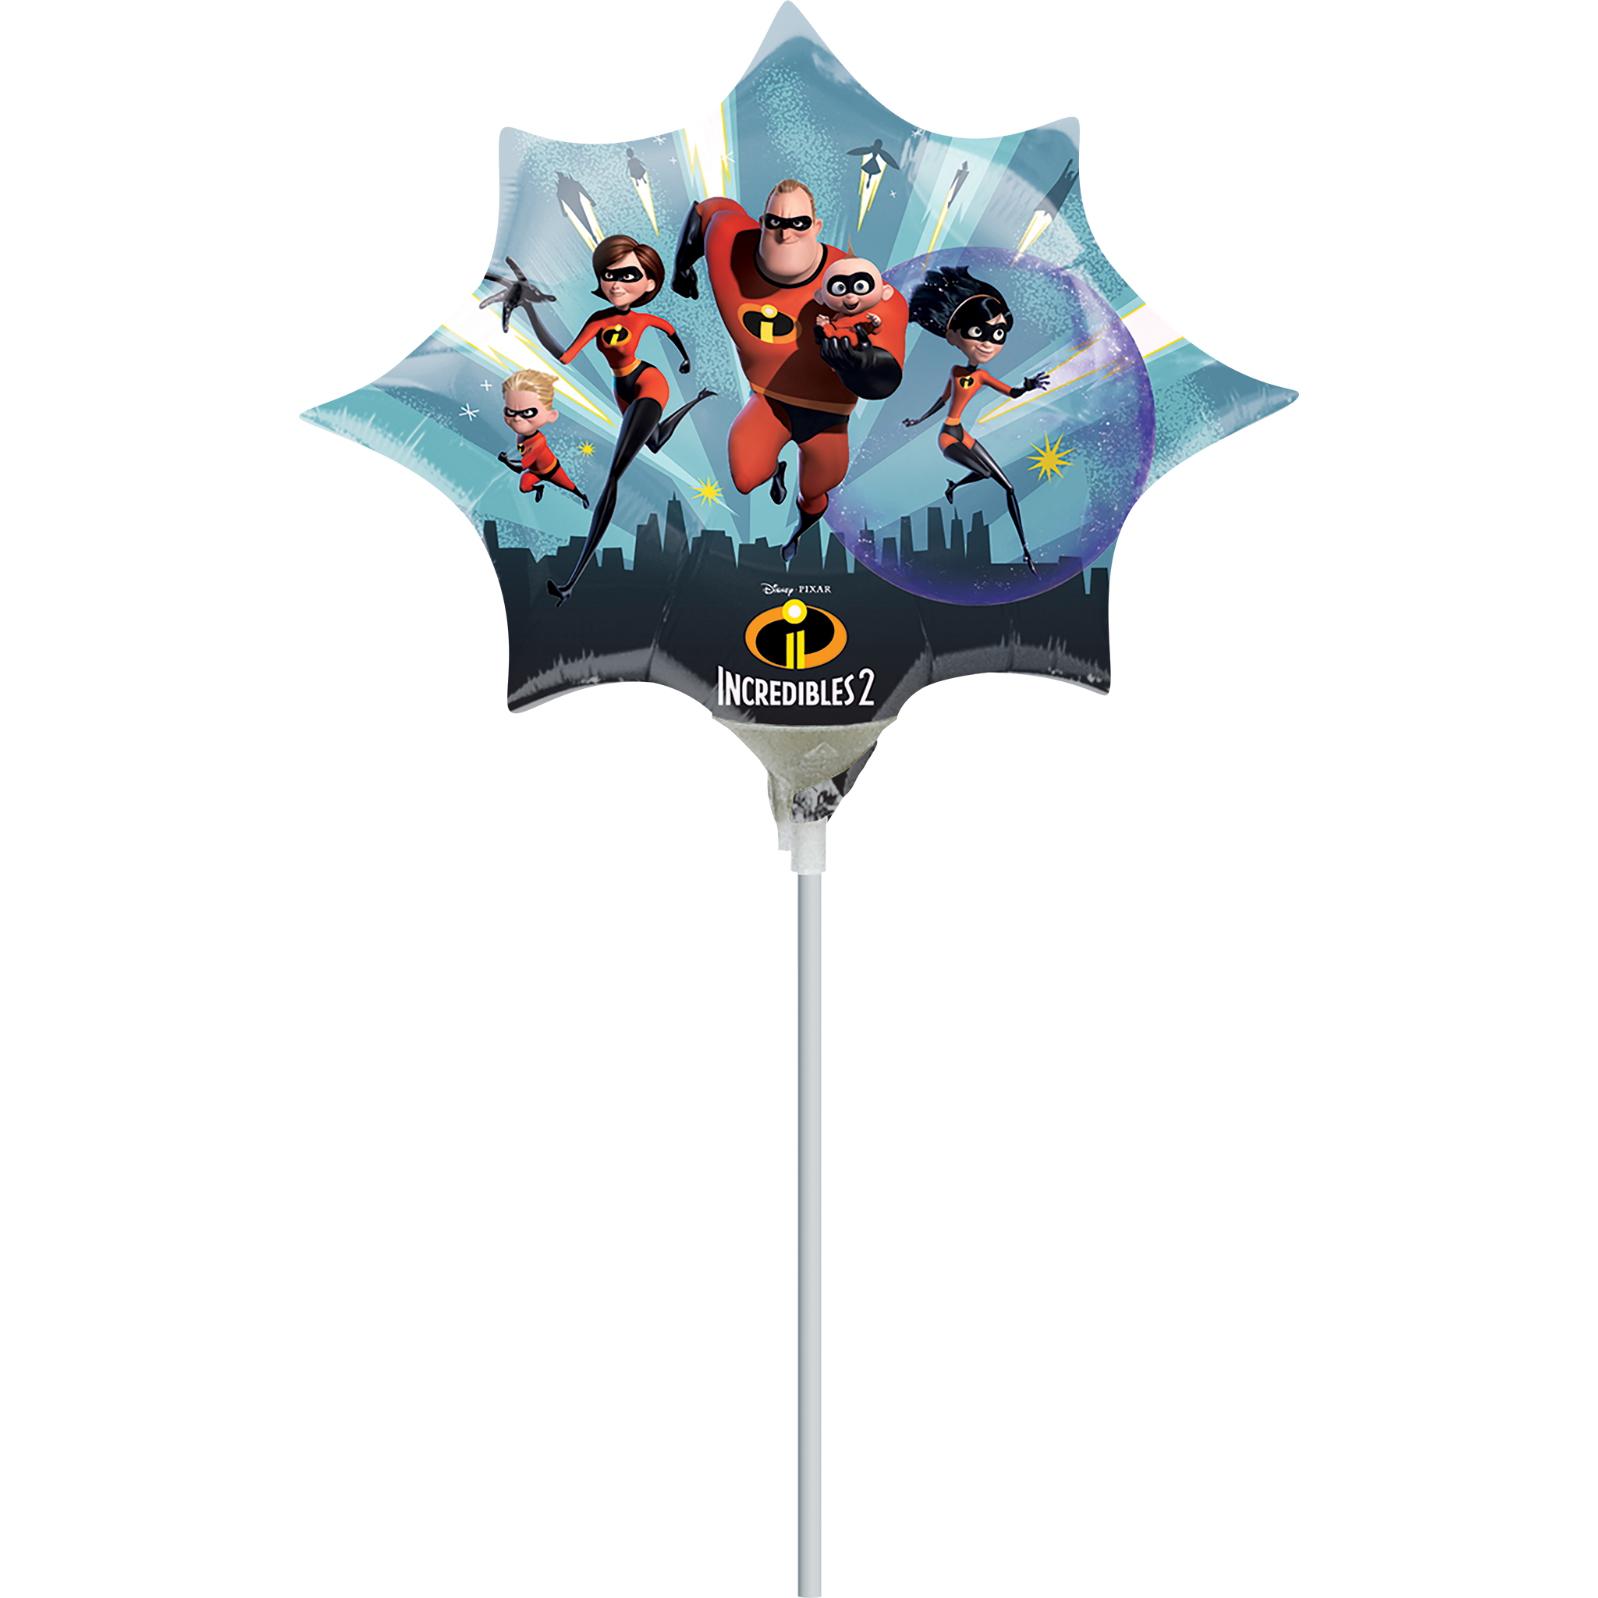 The Incredibles 2 Mini Shape Foil Balloon Balloons & Streamers - Party Centre - Party Centre